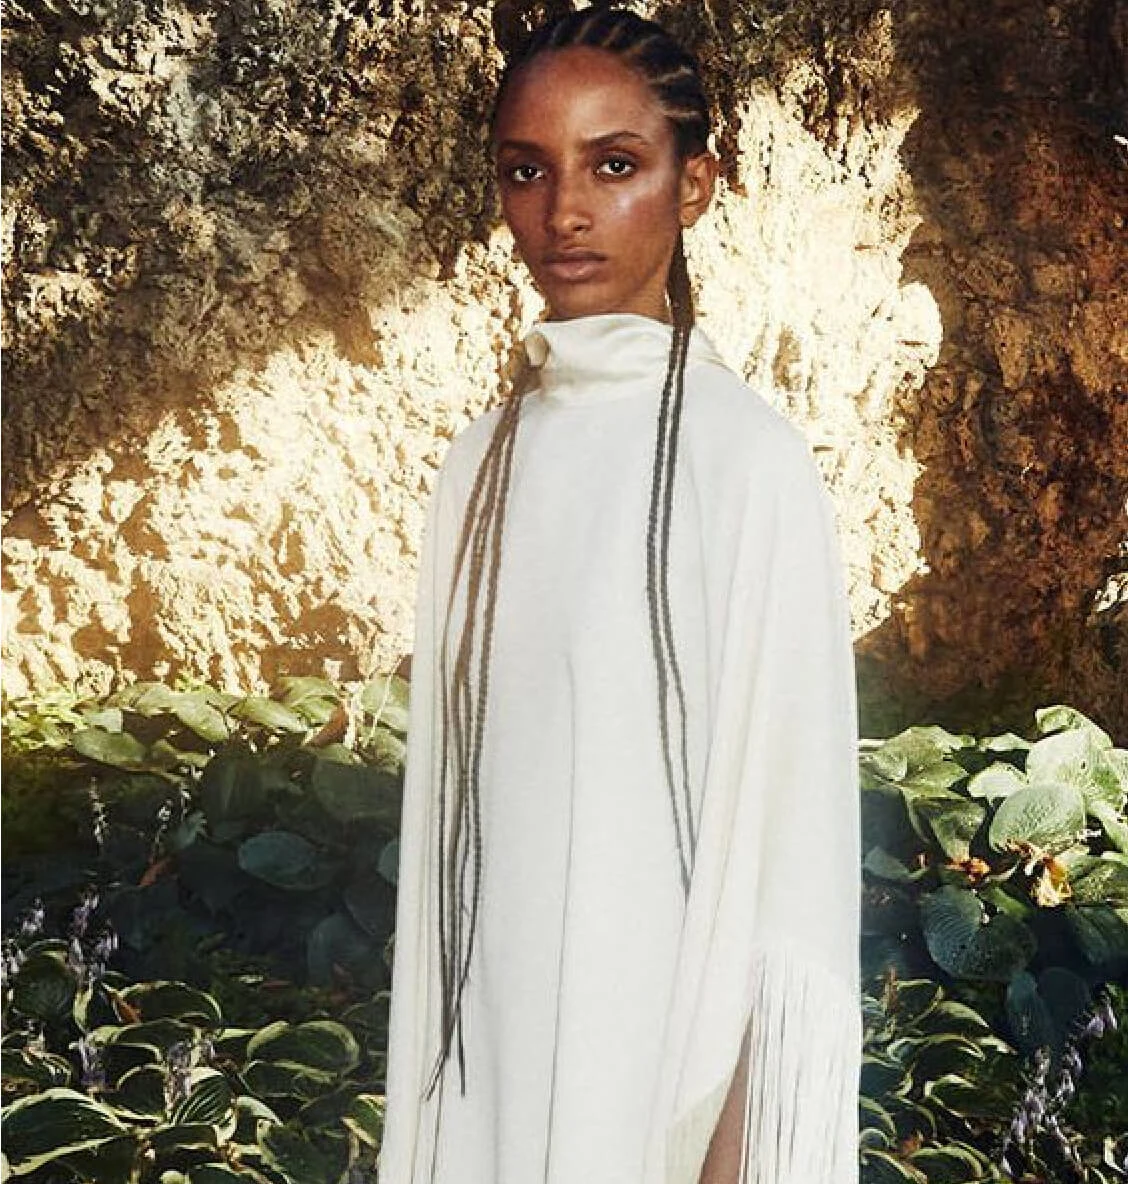 Black woman with braids stands outside in front of green vegetation and a cave, wearing a white dress with turtle neck and fringe.